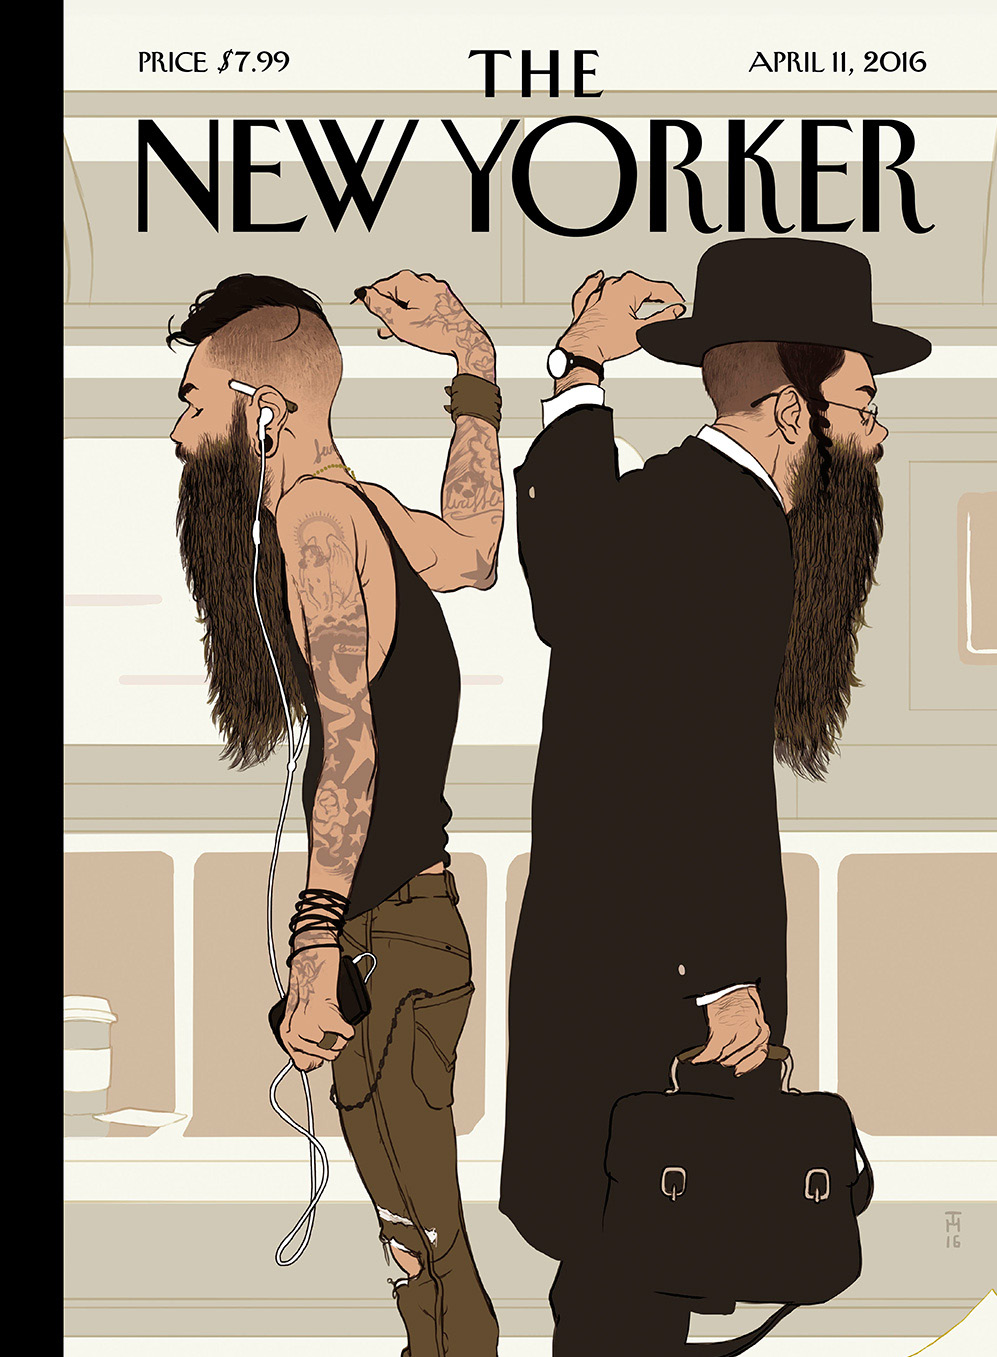 The New Yorker - "Take the L Train," April 11